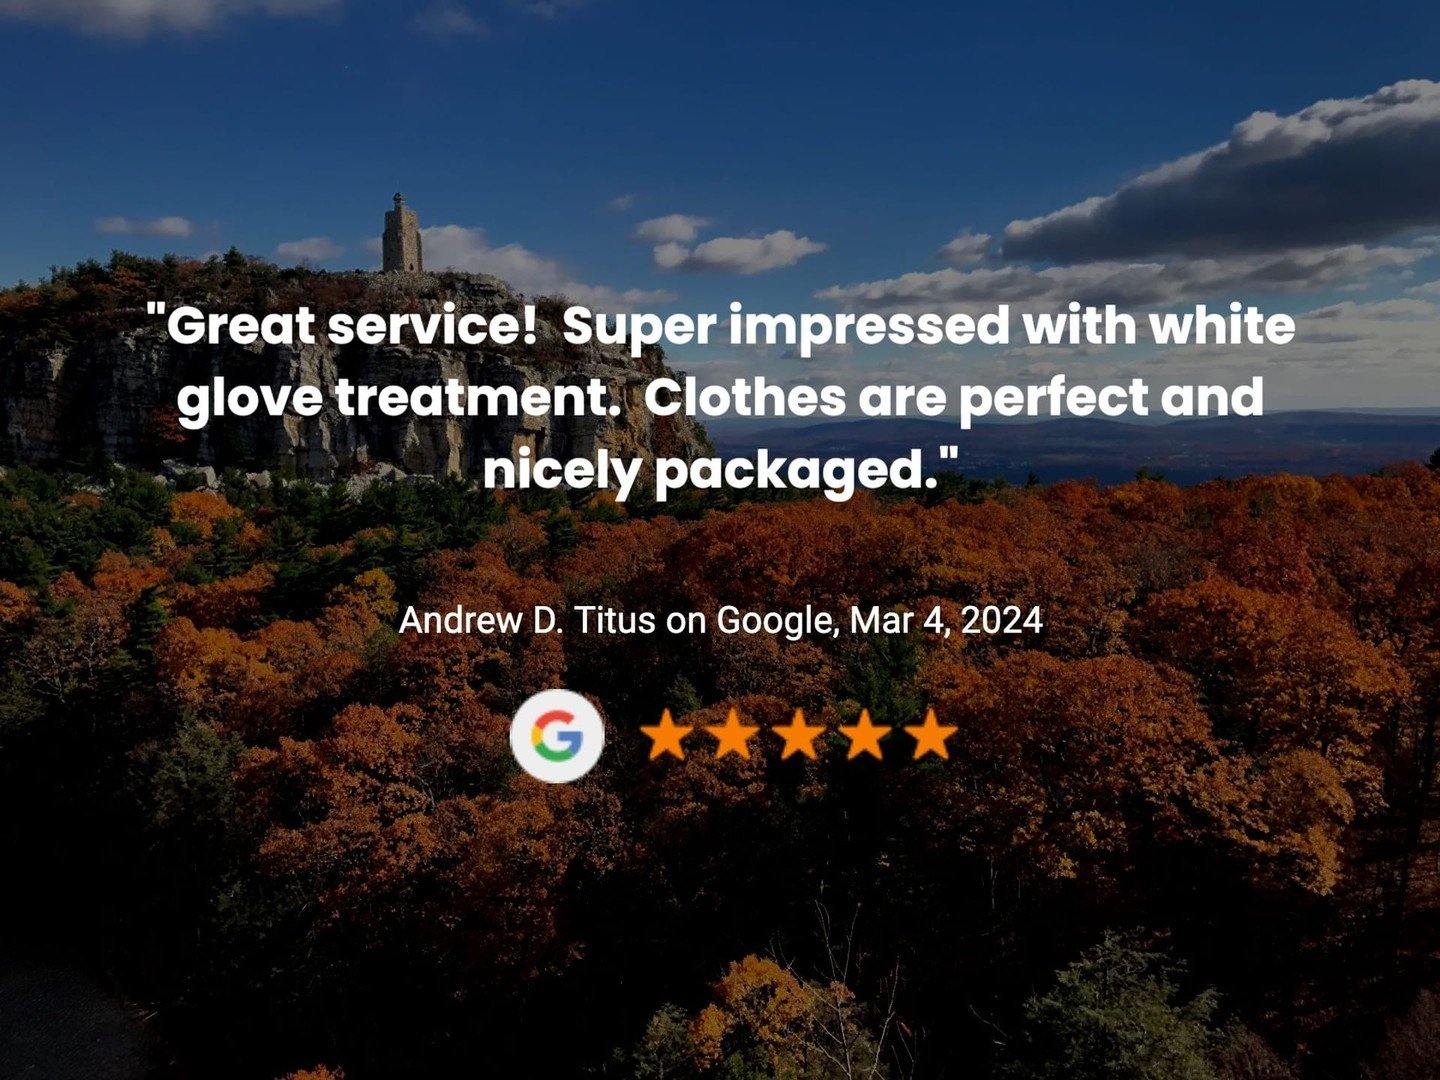 Thanks, Andrew!  We love our drives through the Gunks!! #newpaltz #gardiner #shawangunks #hudsonvalley #drycleaning #washandfold #delivery